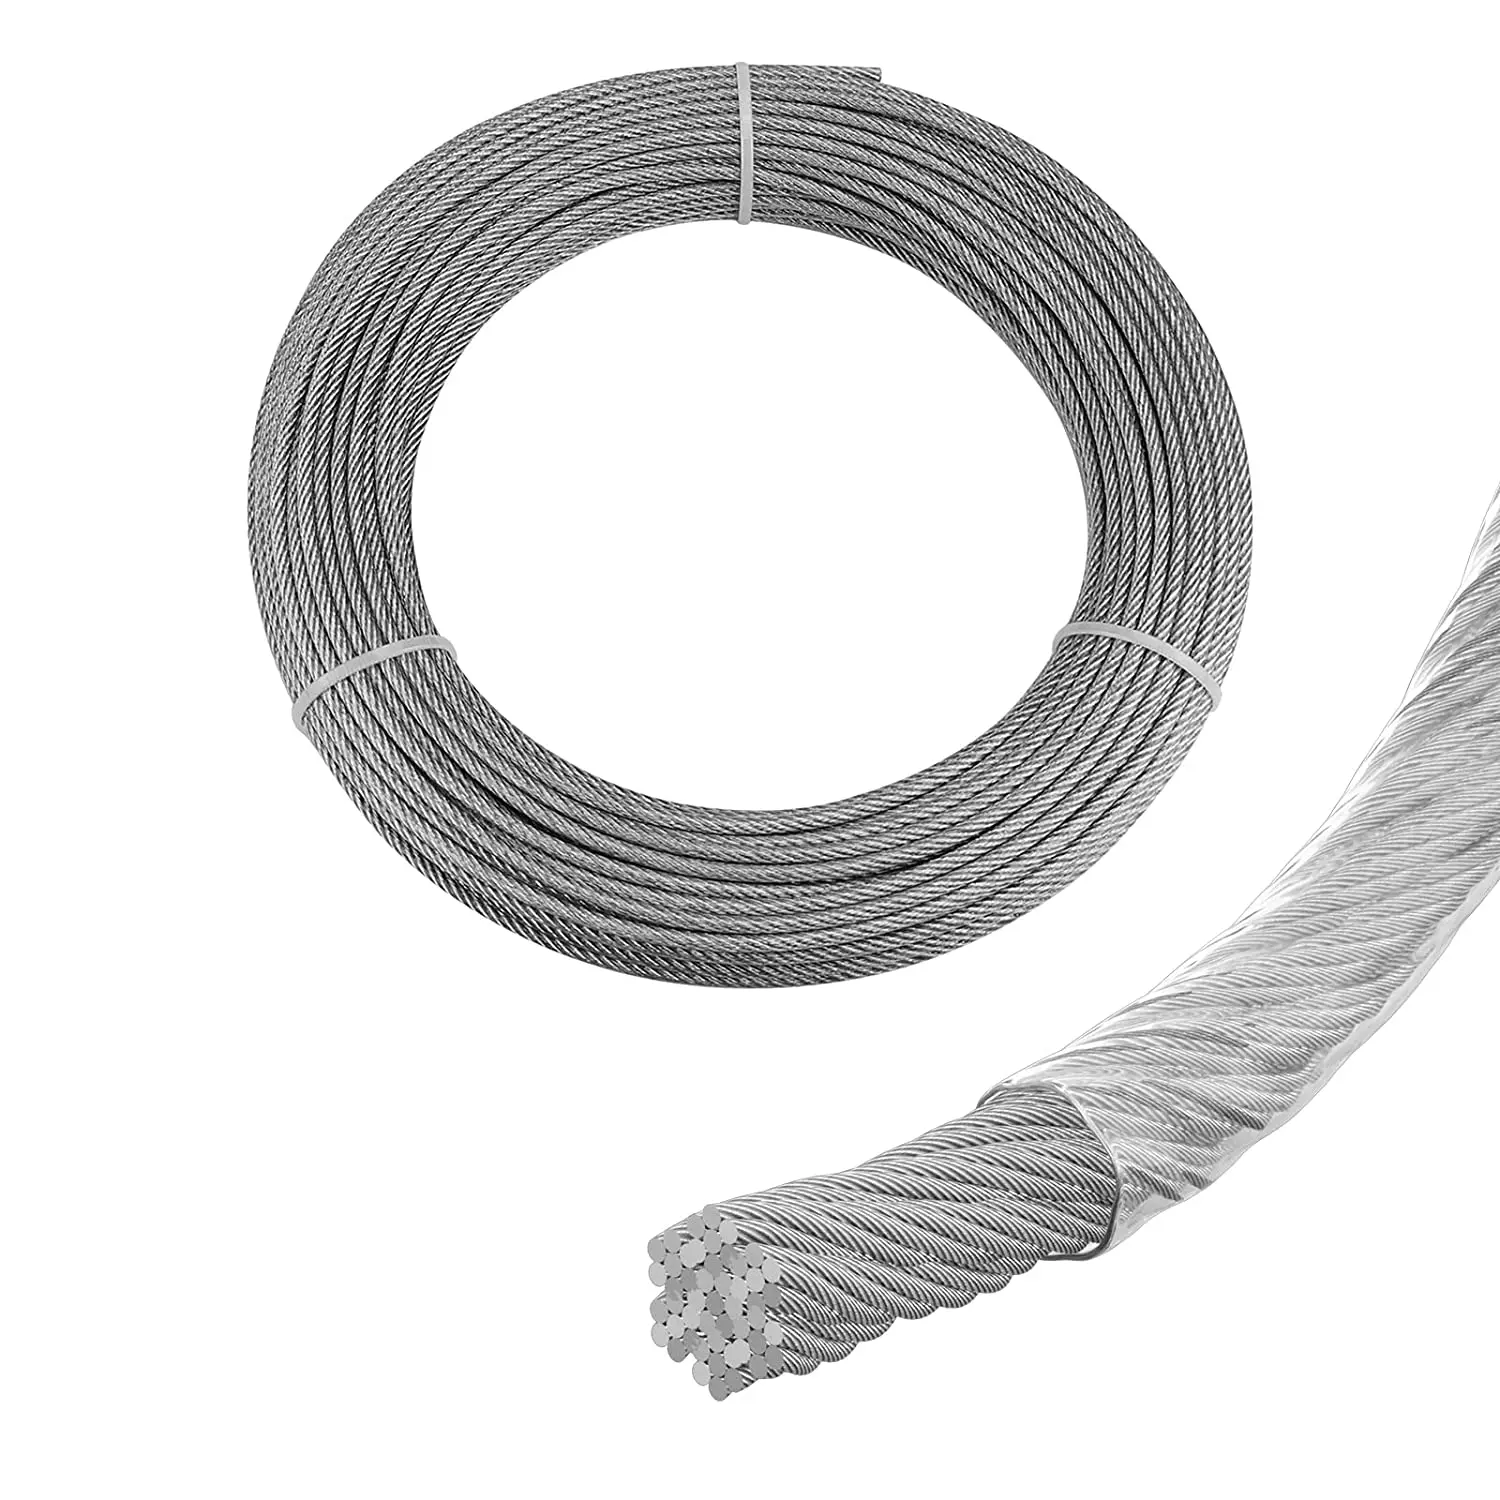 Muzata 165feet Wire Rope Crystal Vinyl Coated 332inch Thru 18inch Stainless Steel Aircraft Cable Outdoor Indoor 7x7 Strand Cloth